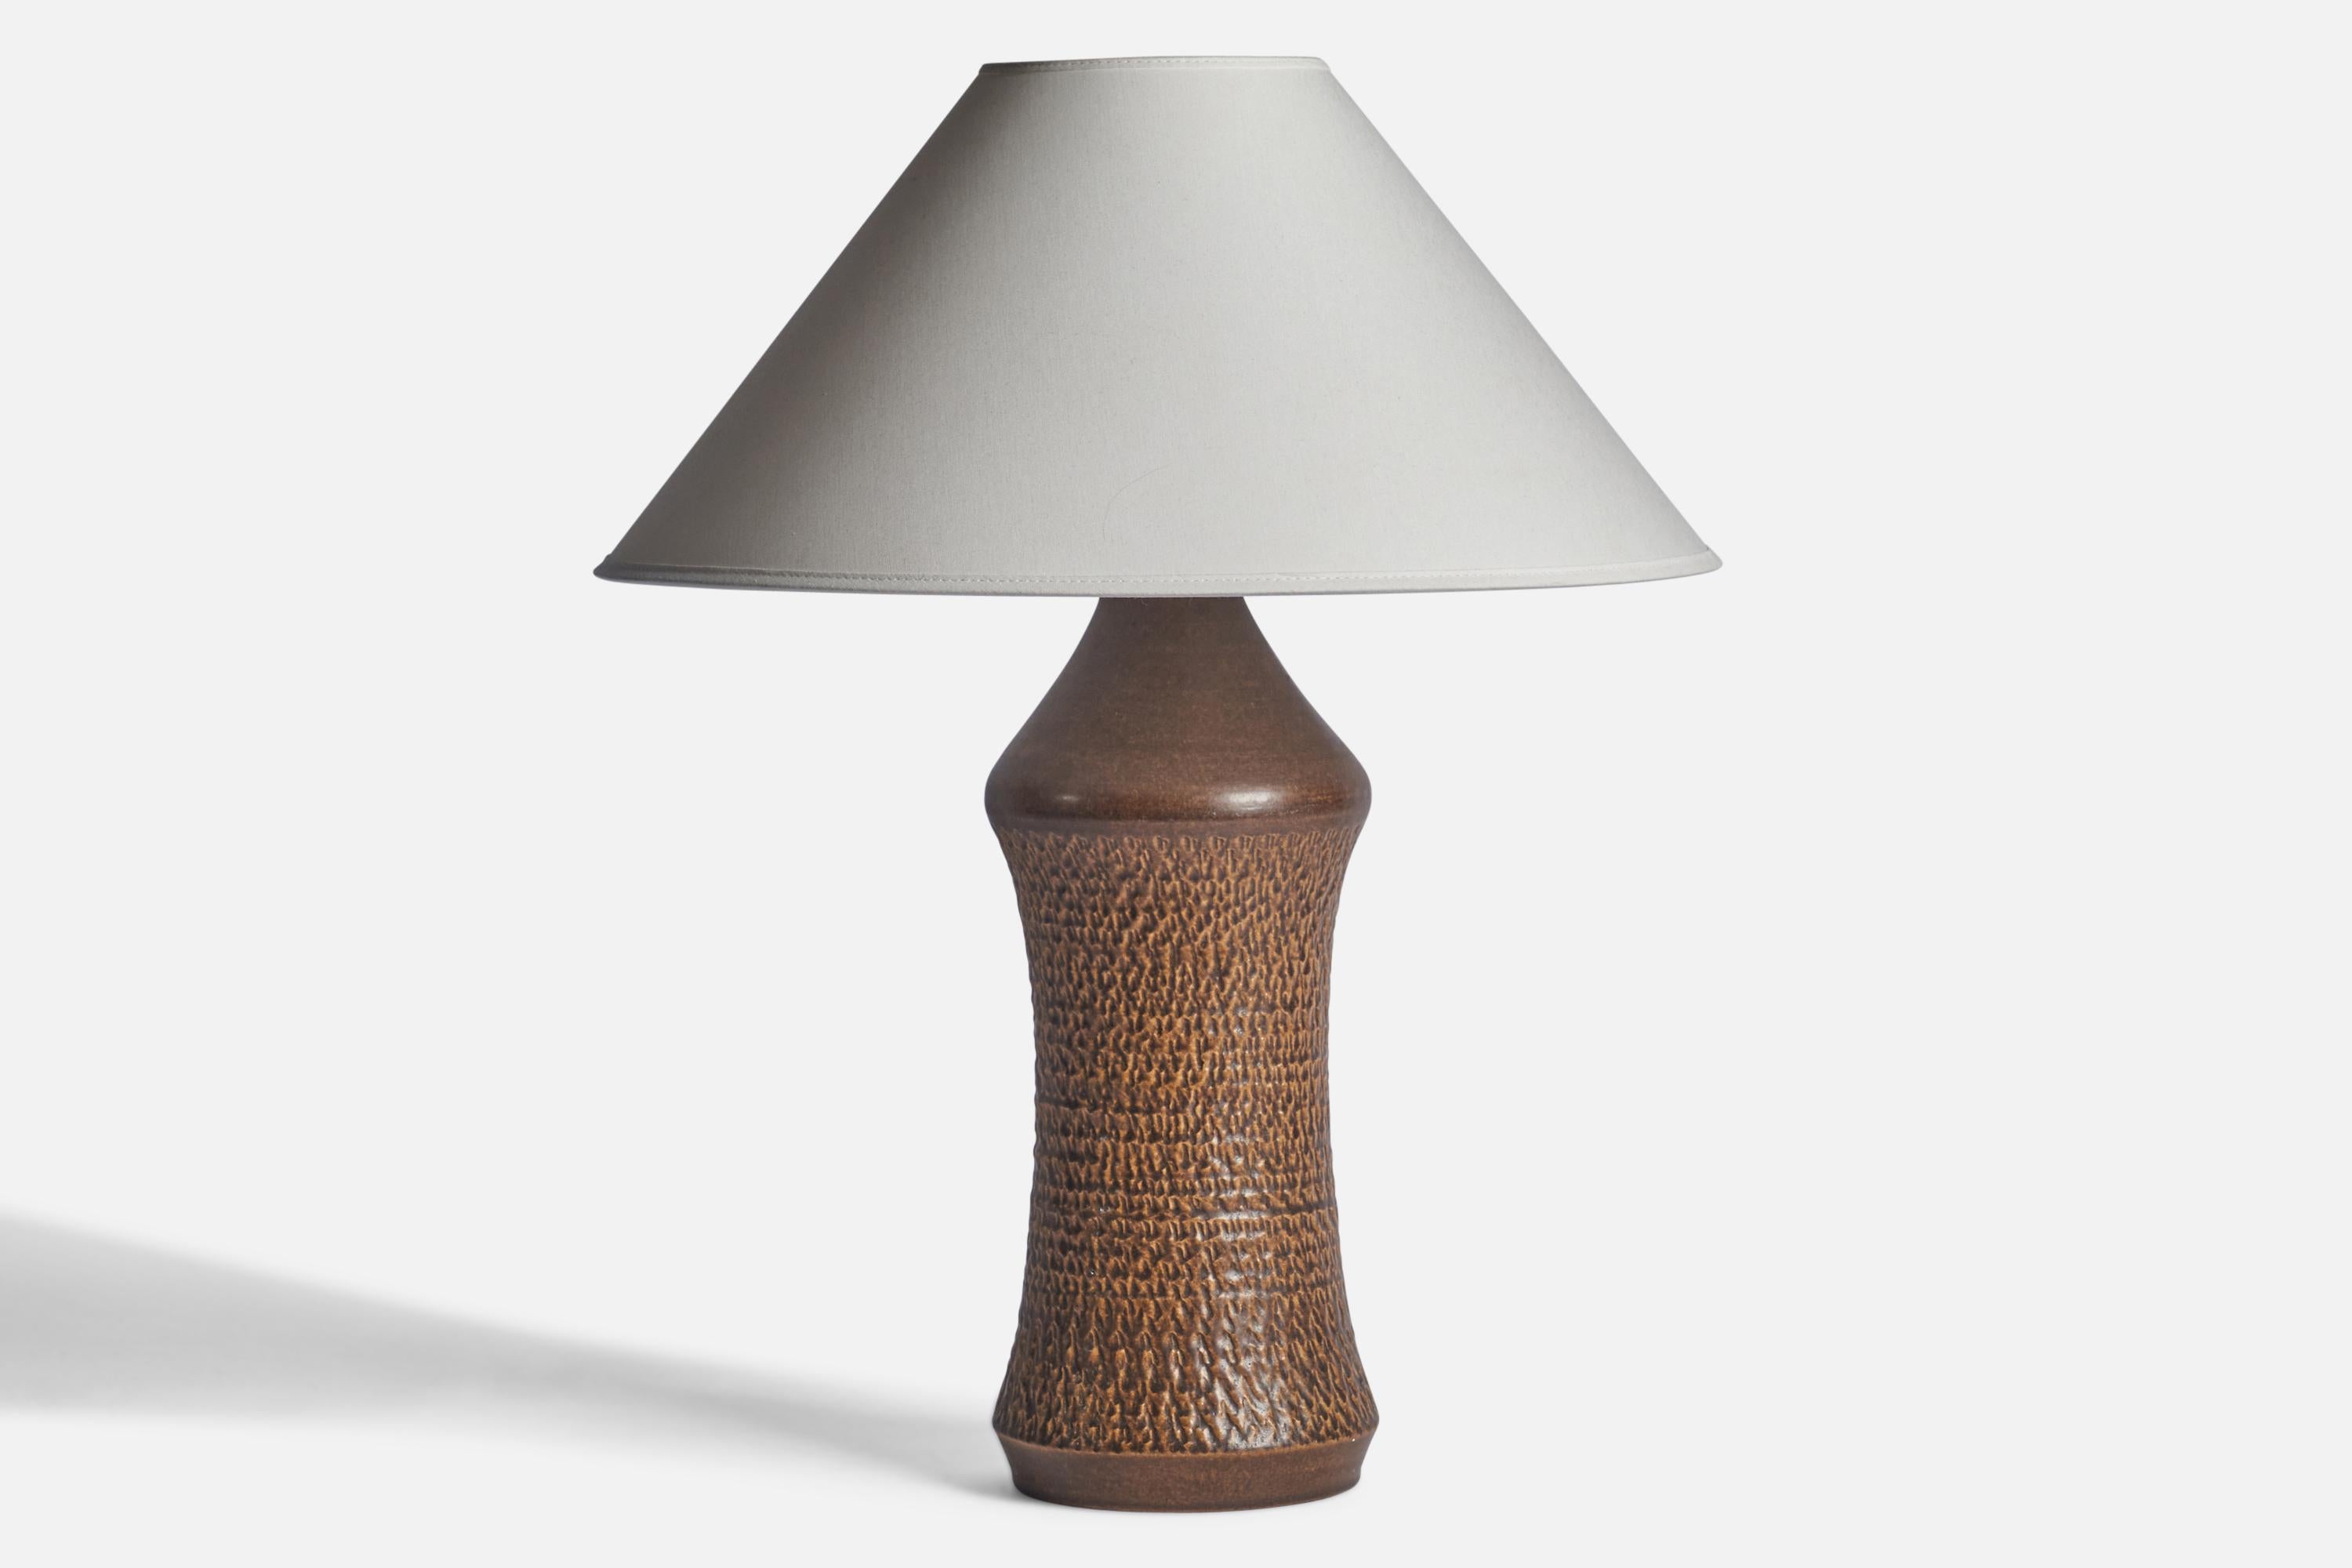 A brown-glazed incised table lamp designed and produced by Henry Brandi, Sweden, 1960s.

Dimensions of Lamp (inches): 16